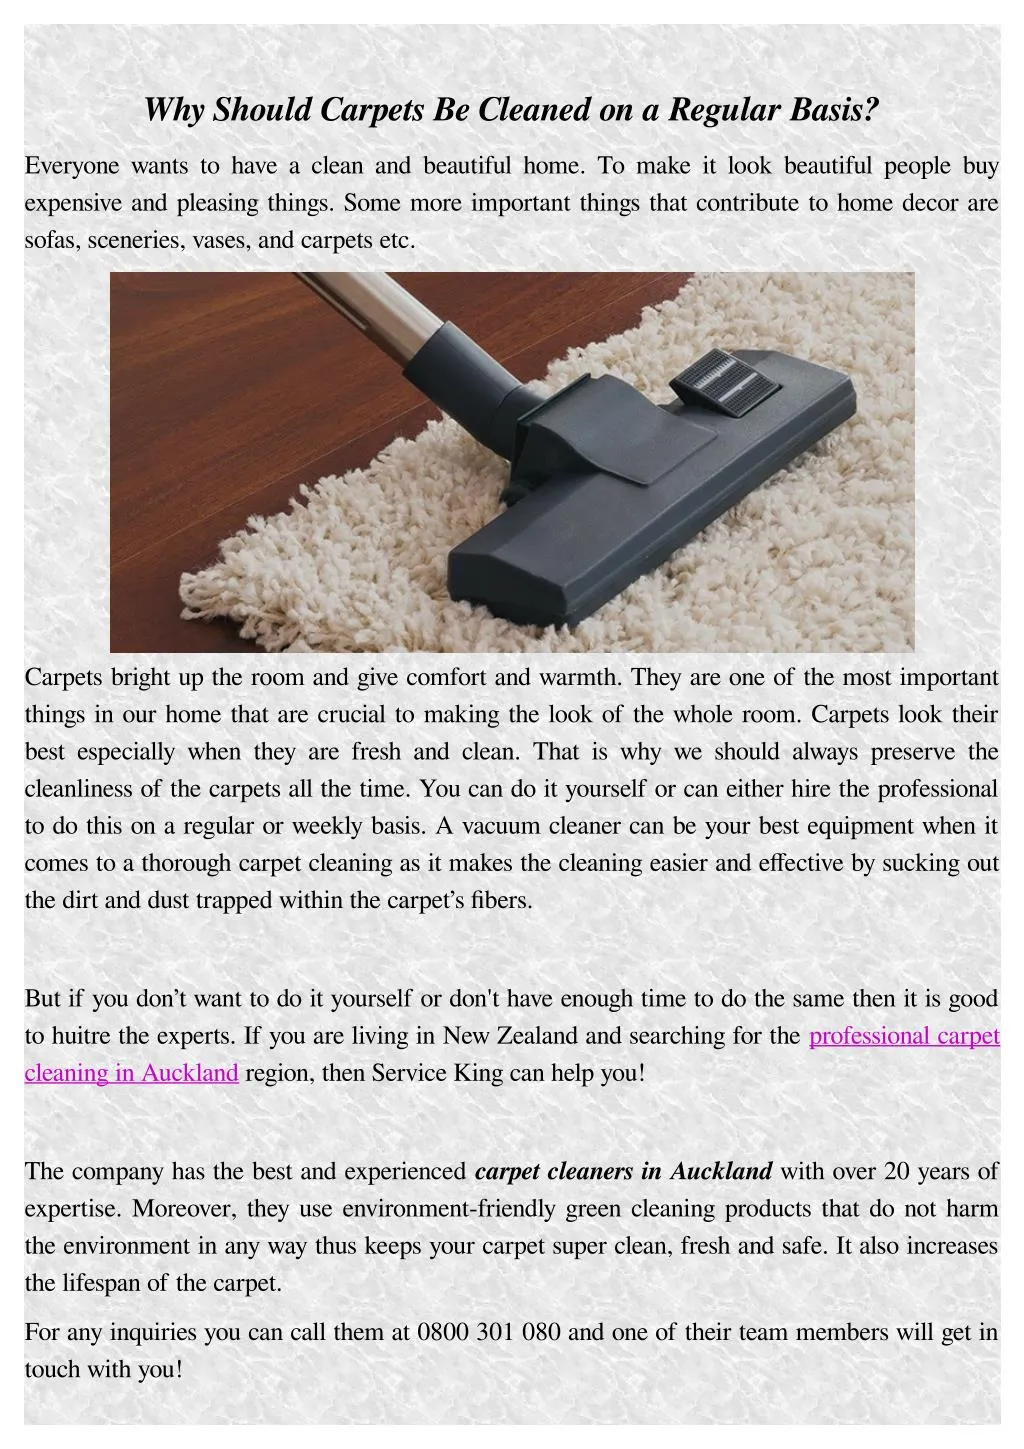 why should carpets be cleaned on a regular basis